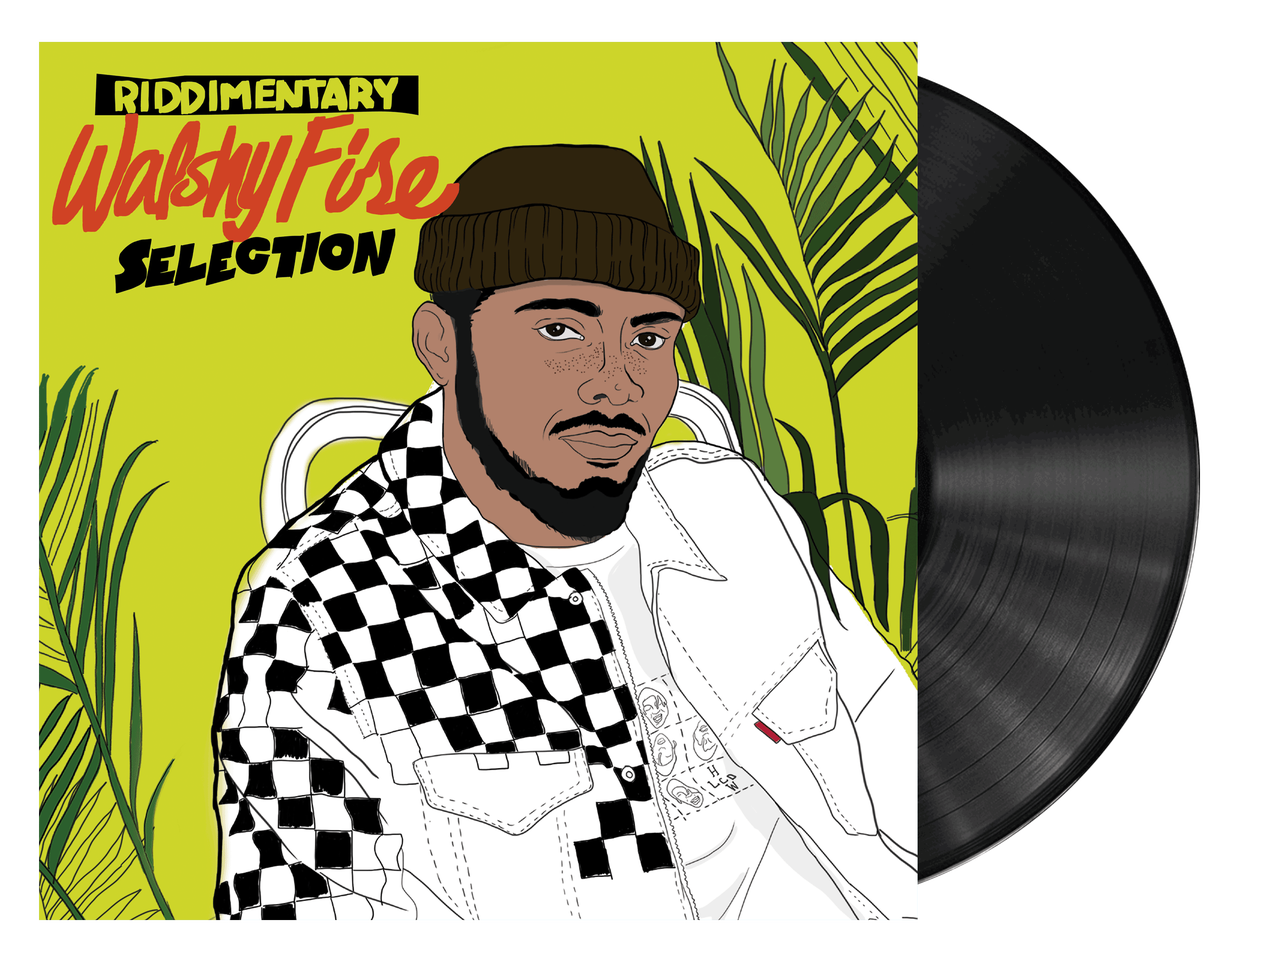 Walshy Fire: Riddimentary Selection